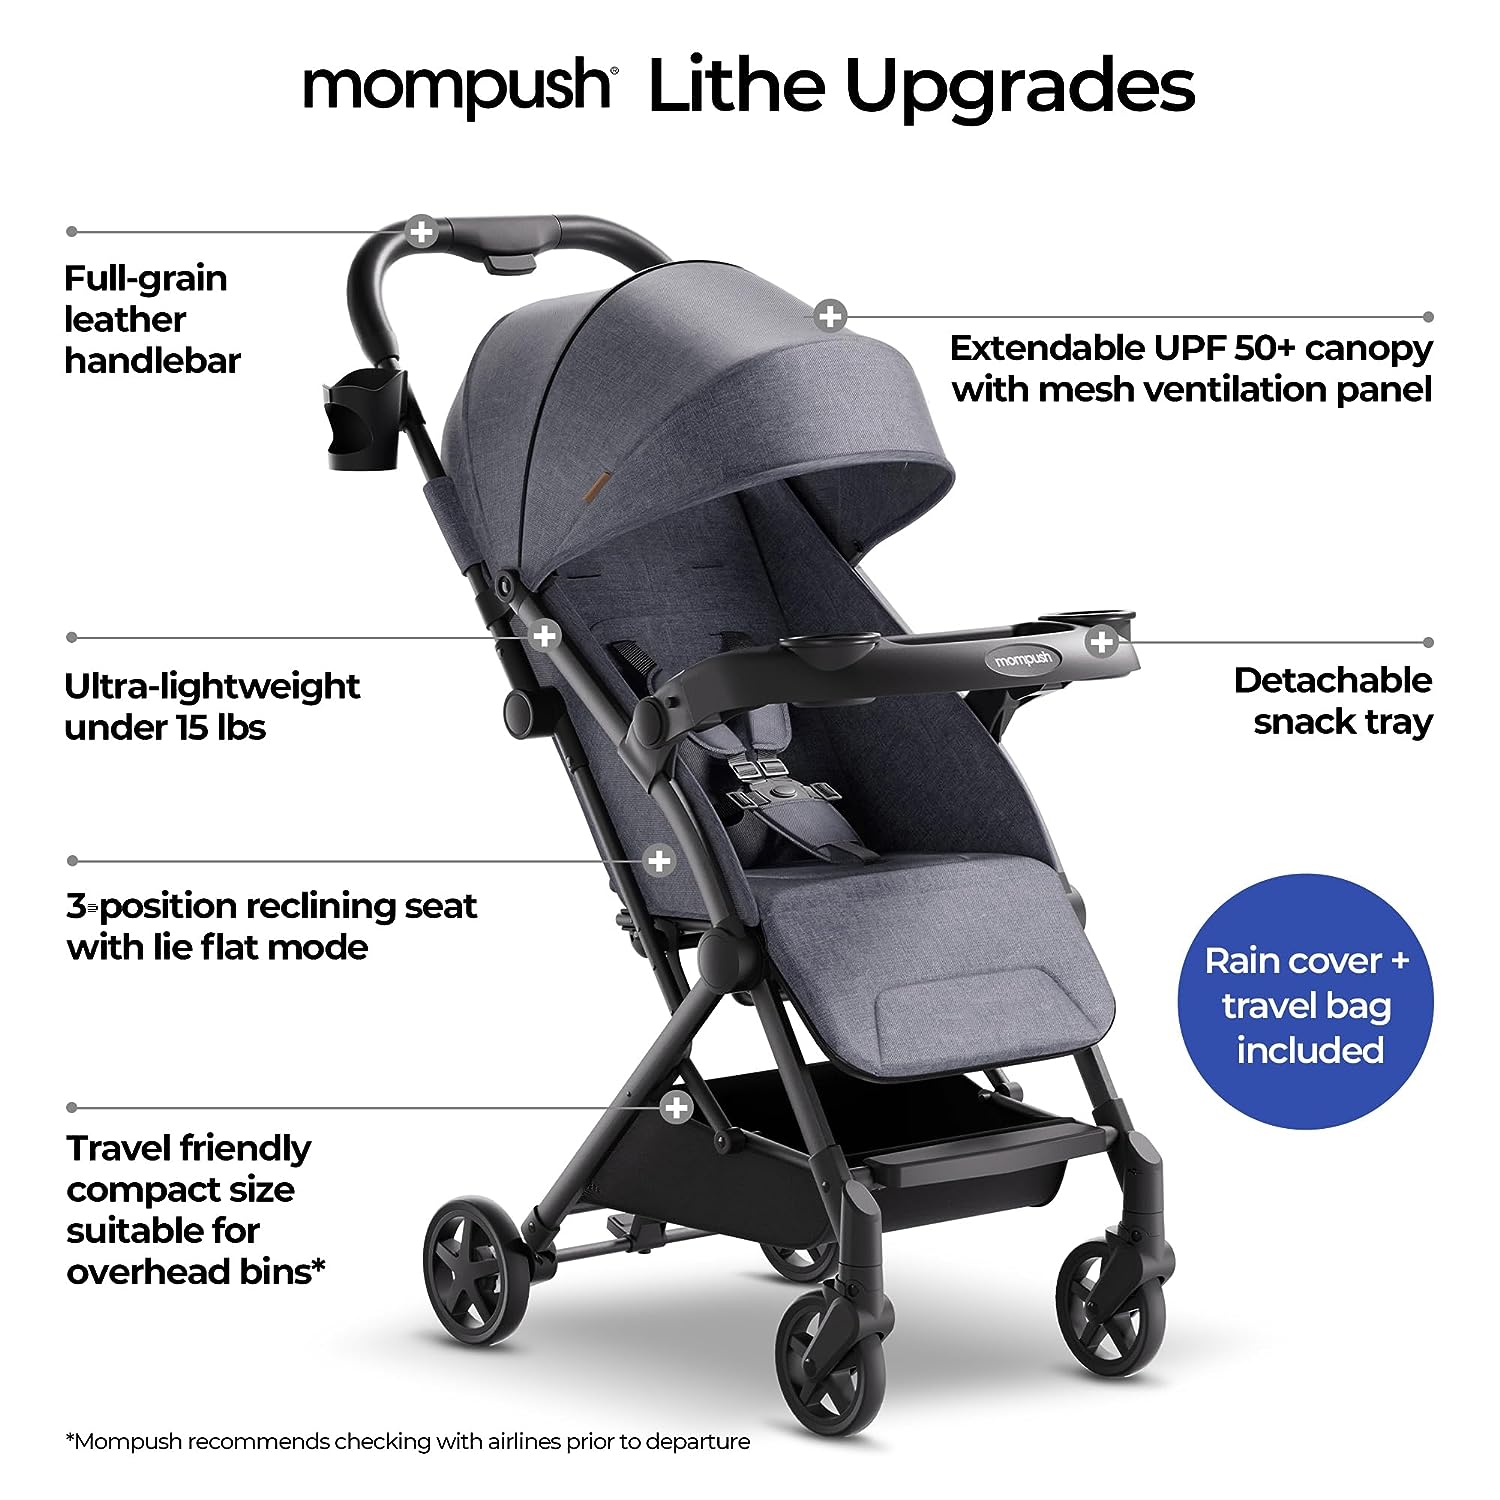 Mompush Lithe V2 Lightweight Stroller + Snack Tray, Ultra-Compact Fold  Airplane Ready Travel Stroller, Near Flat Recline Seat, Cup Holder, Raincover  Travelbag Included